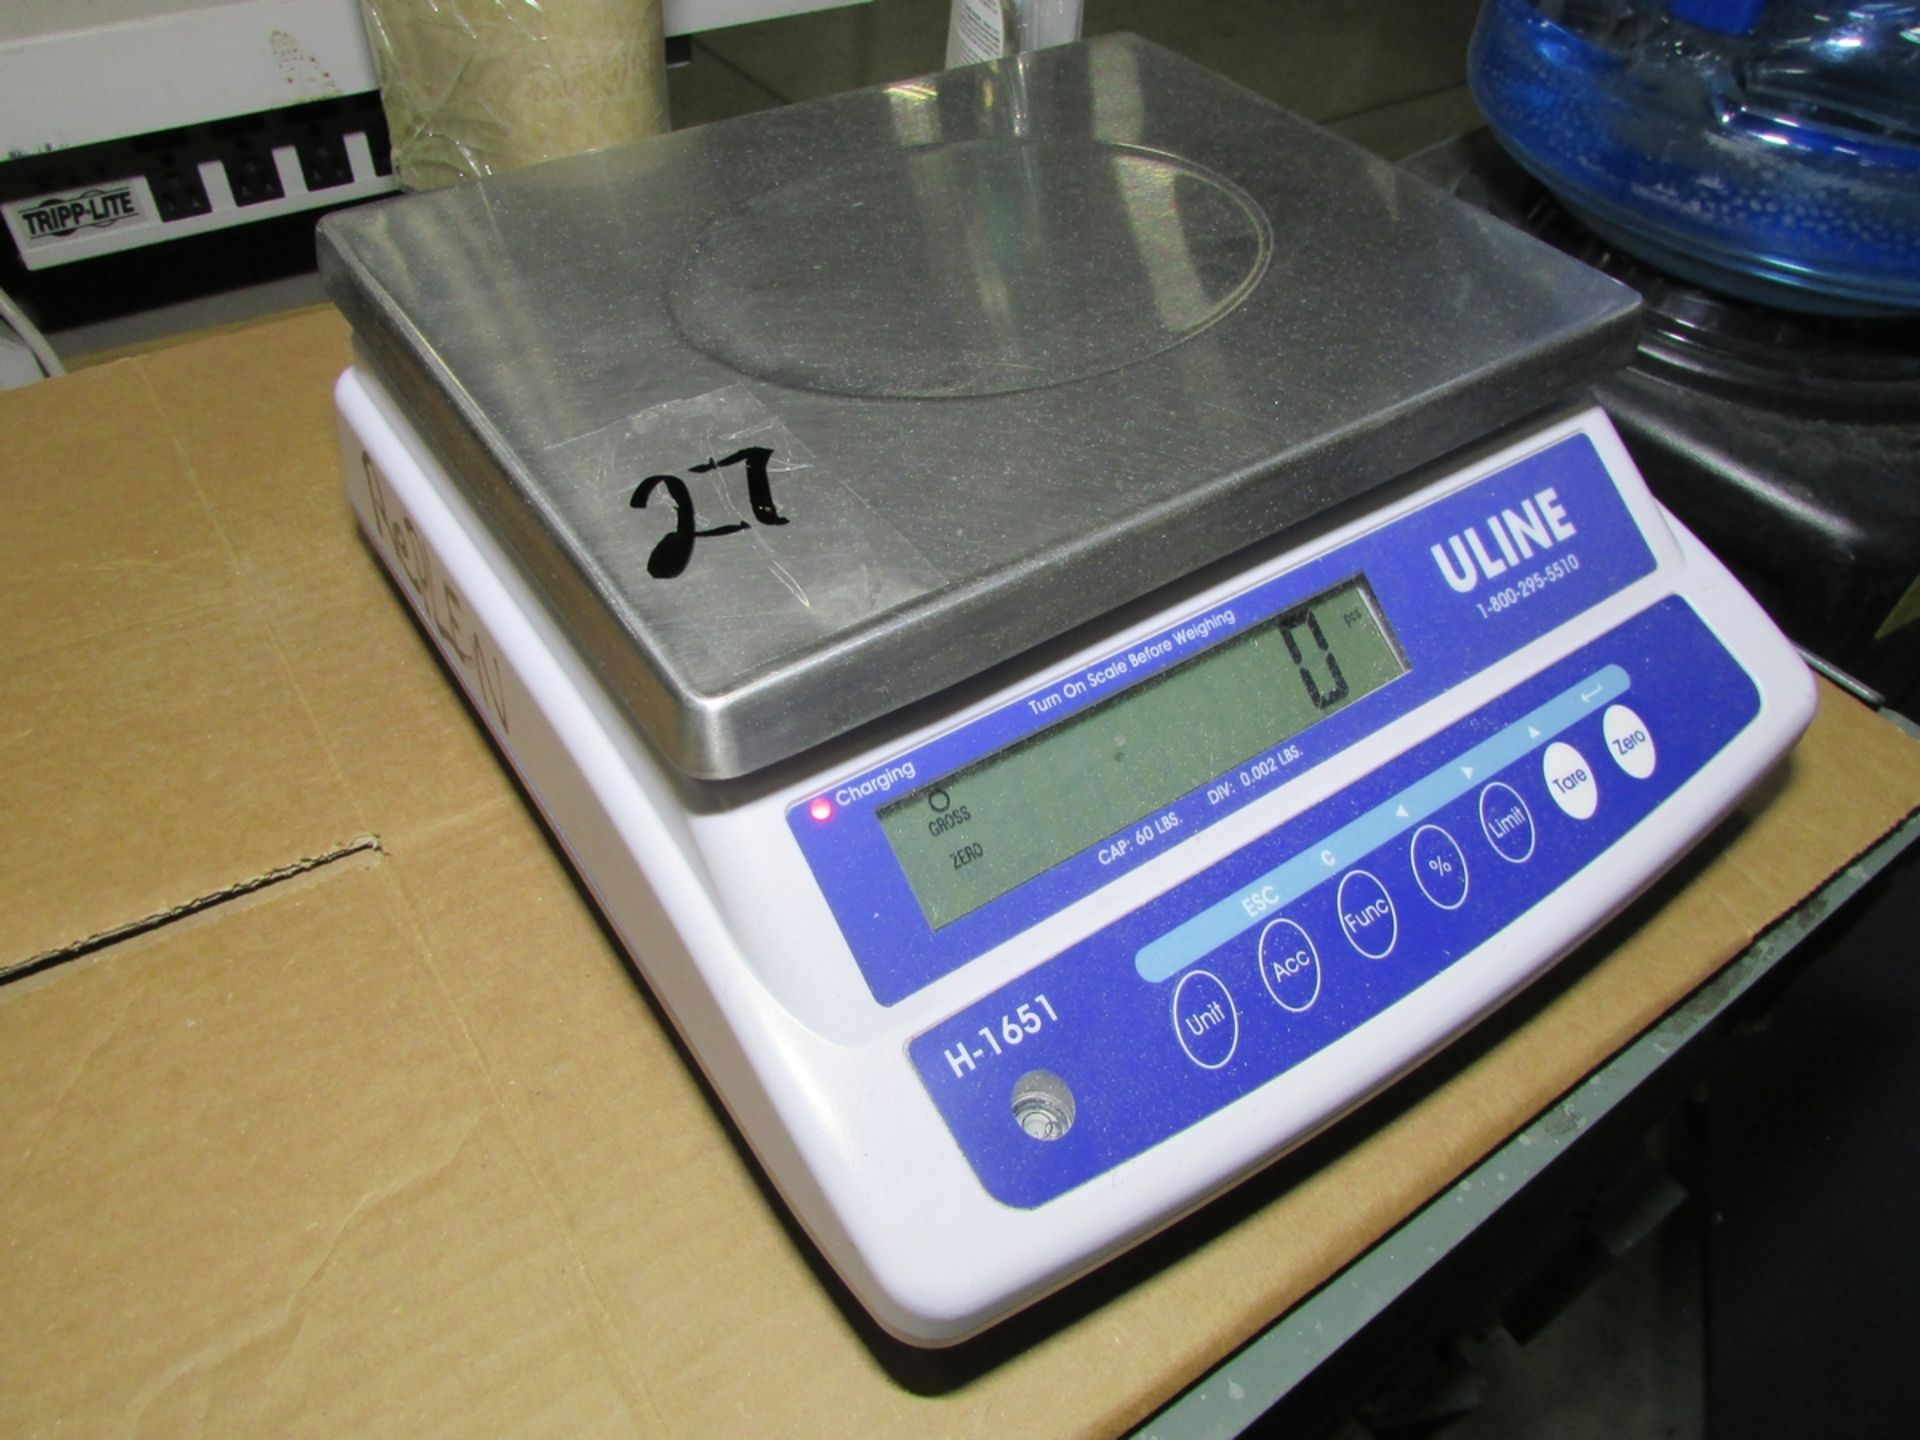 Uline H-1651 60x0.002Lb. Digital Counting Scale